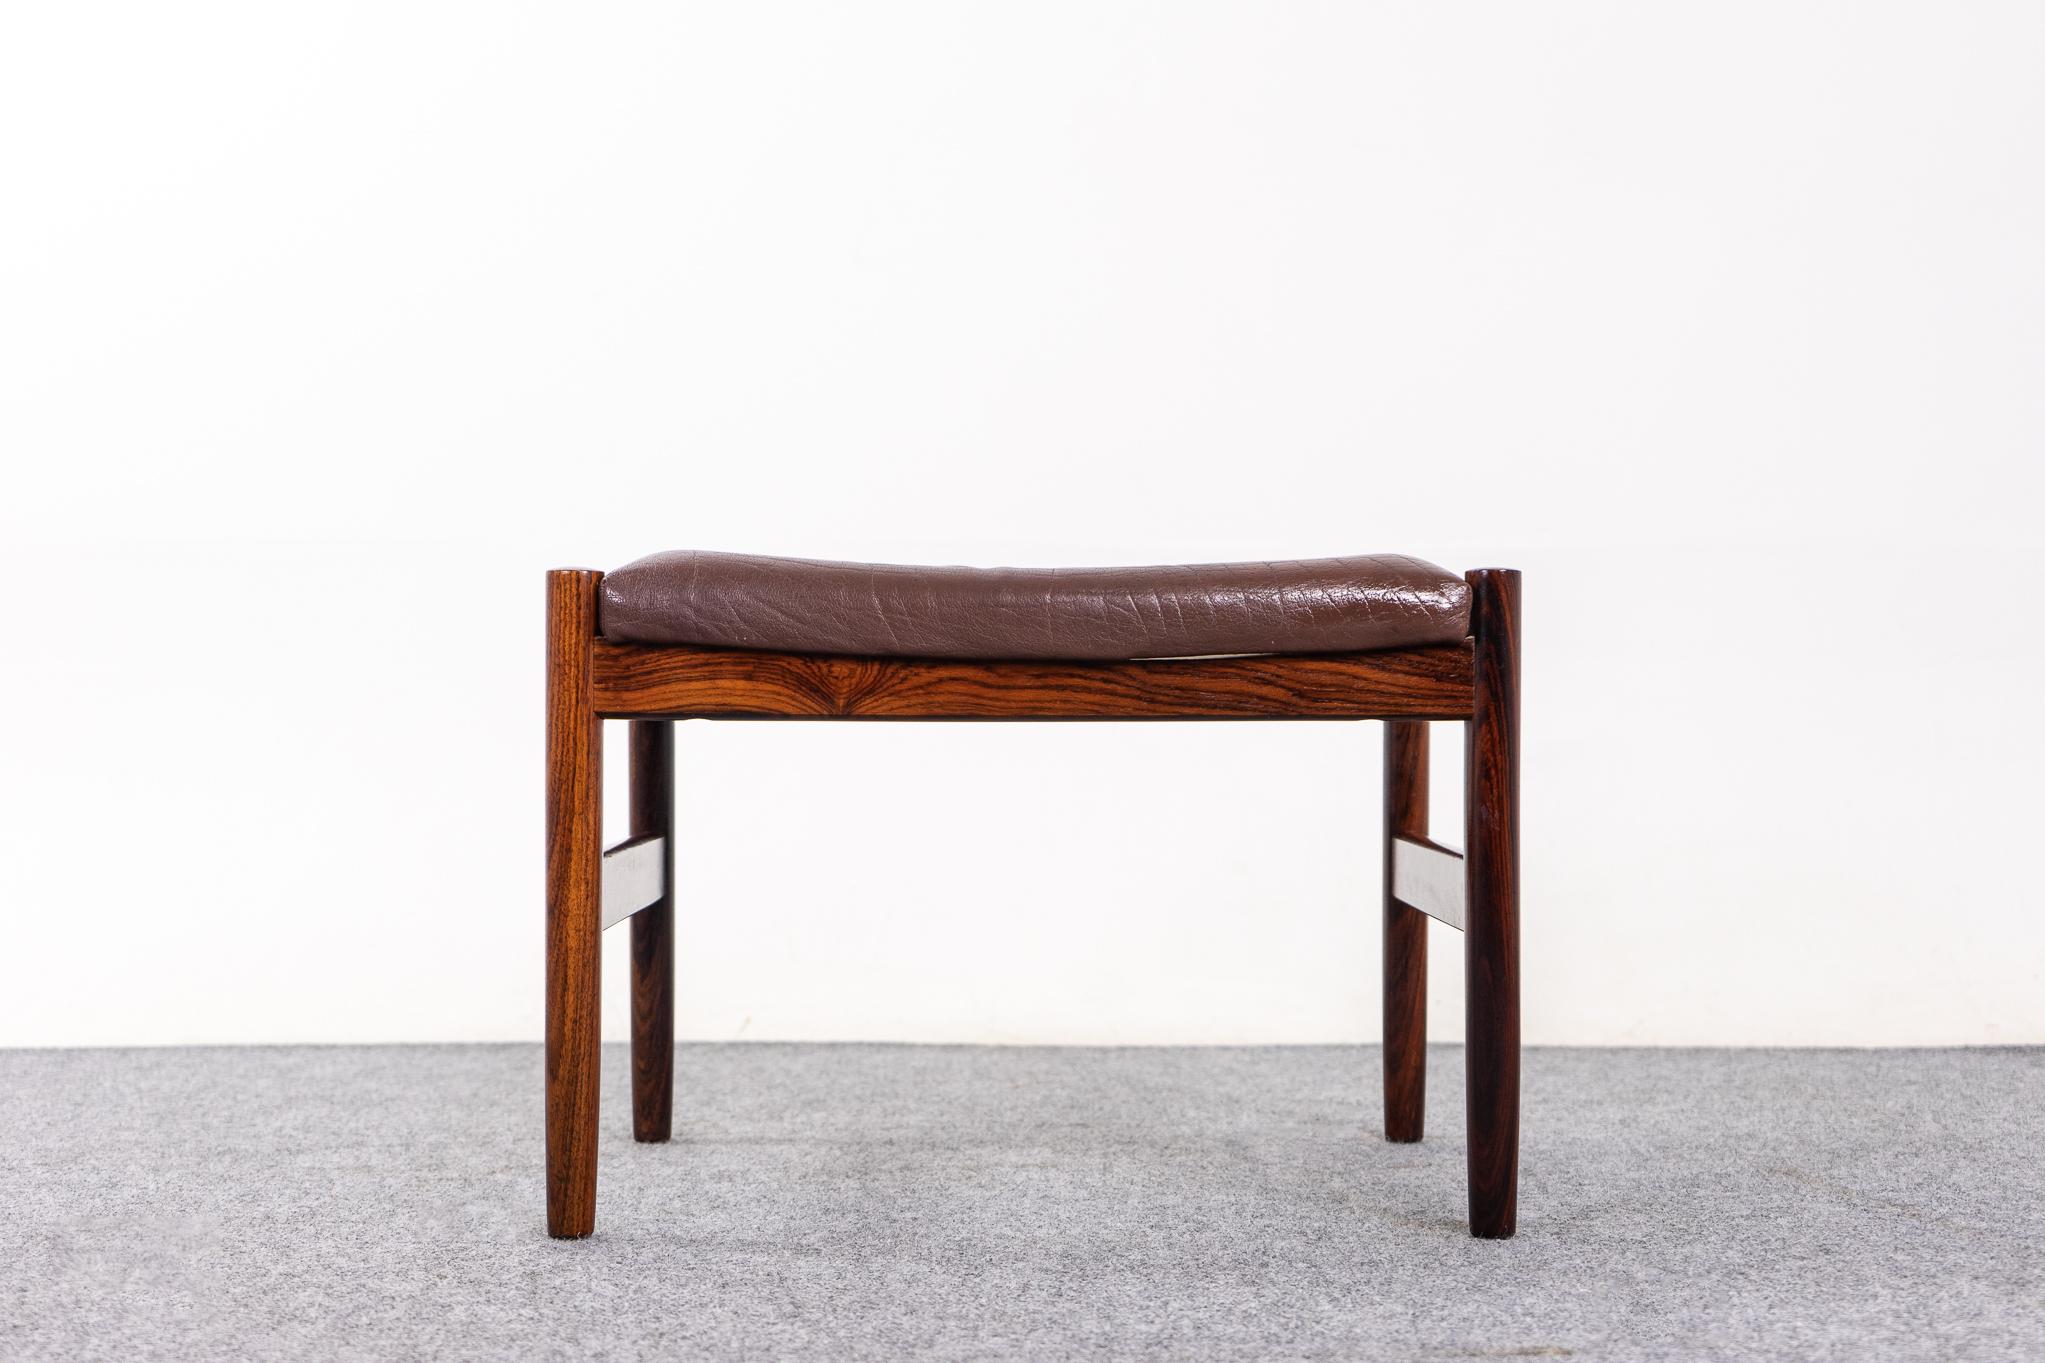 Rosewood Danish modern footstool by Spottrup, circa 1960's. Clean, modern compact design can be used with virtually any seating type. Easy to move around the home. Spottrup maker's mark intact. Rest your tired feet.

Please inquire for international